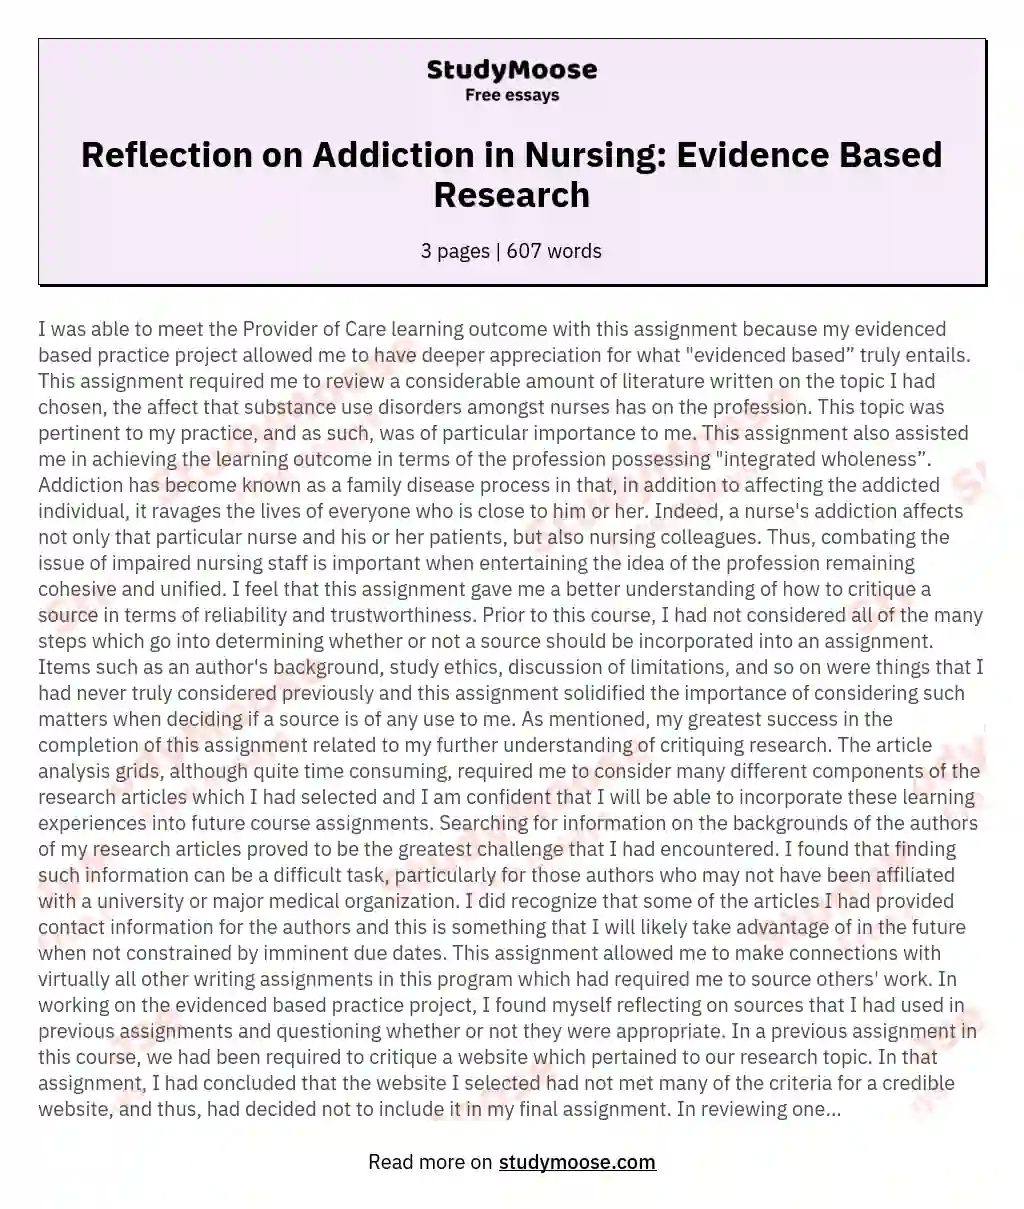 Reflection on Addiction in Nursing: Evidence Based Research essay